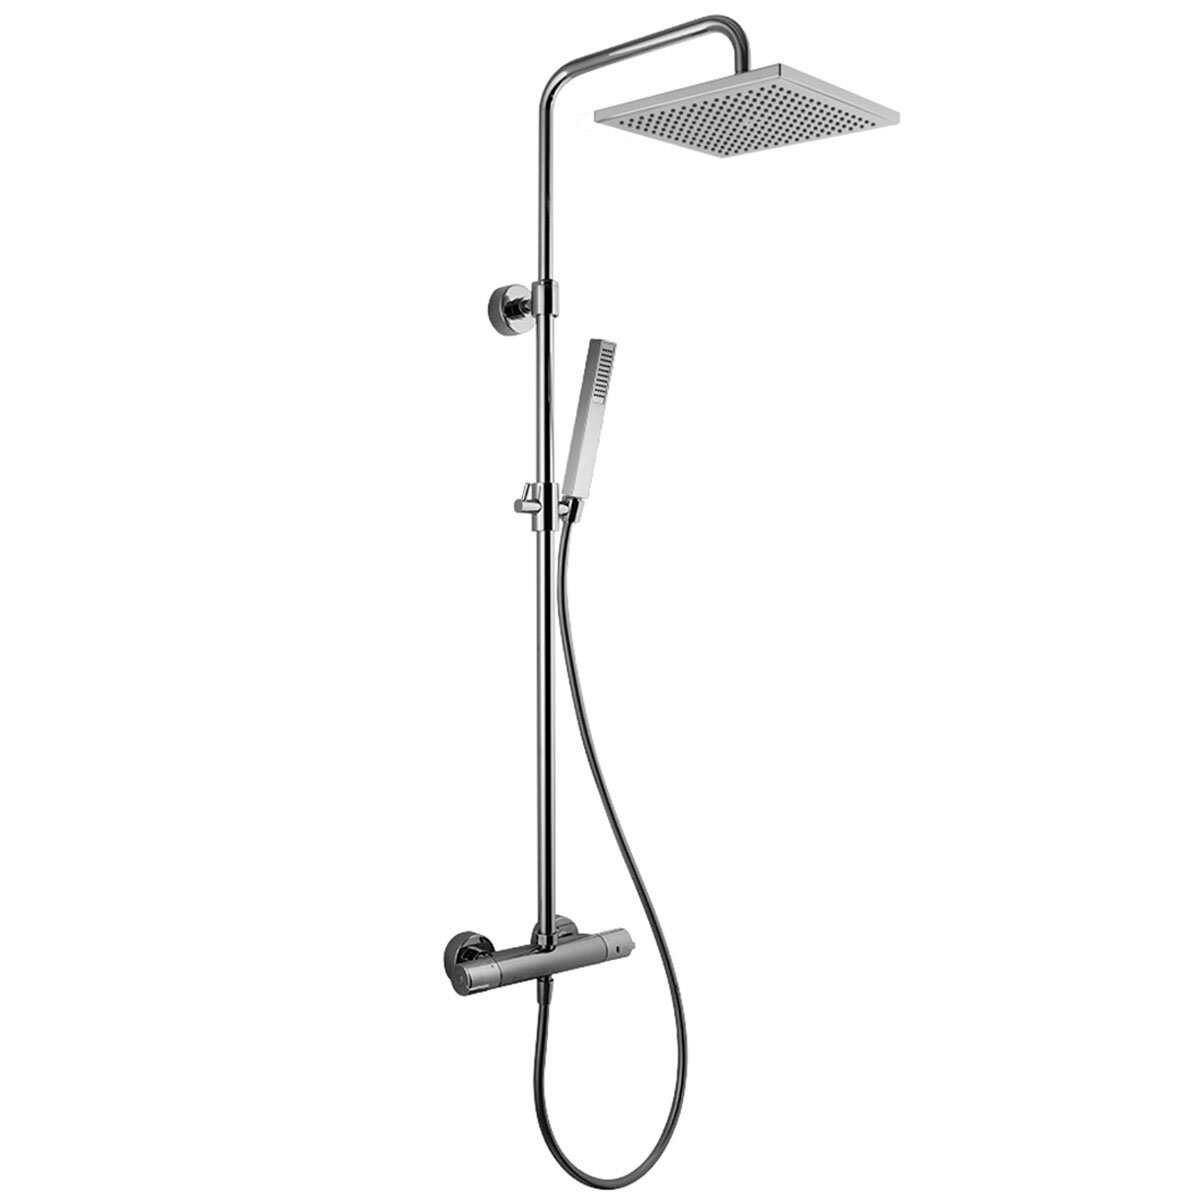 Fima Carlo Frattini Wellness Series shower column with thermostatic mixer, shower head and hand shower in ABS